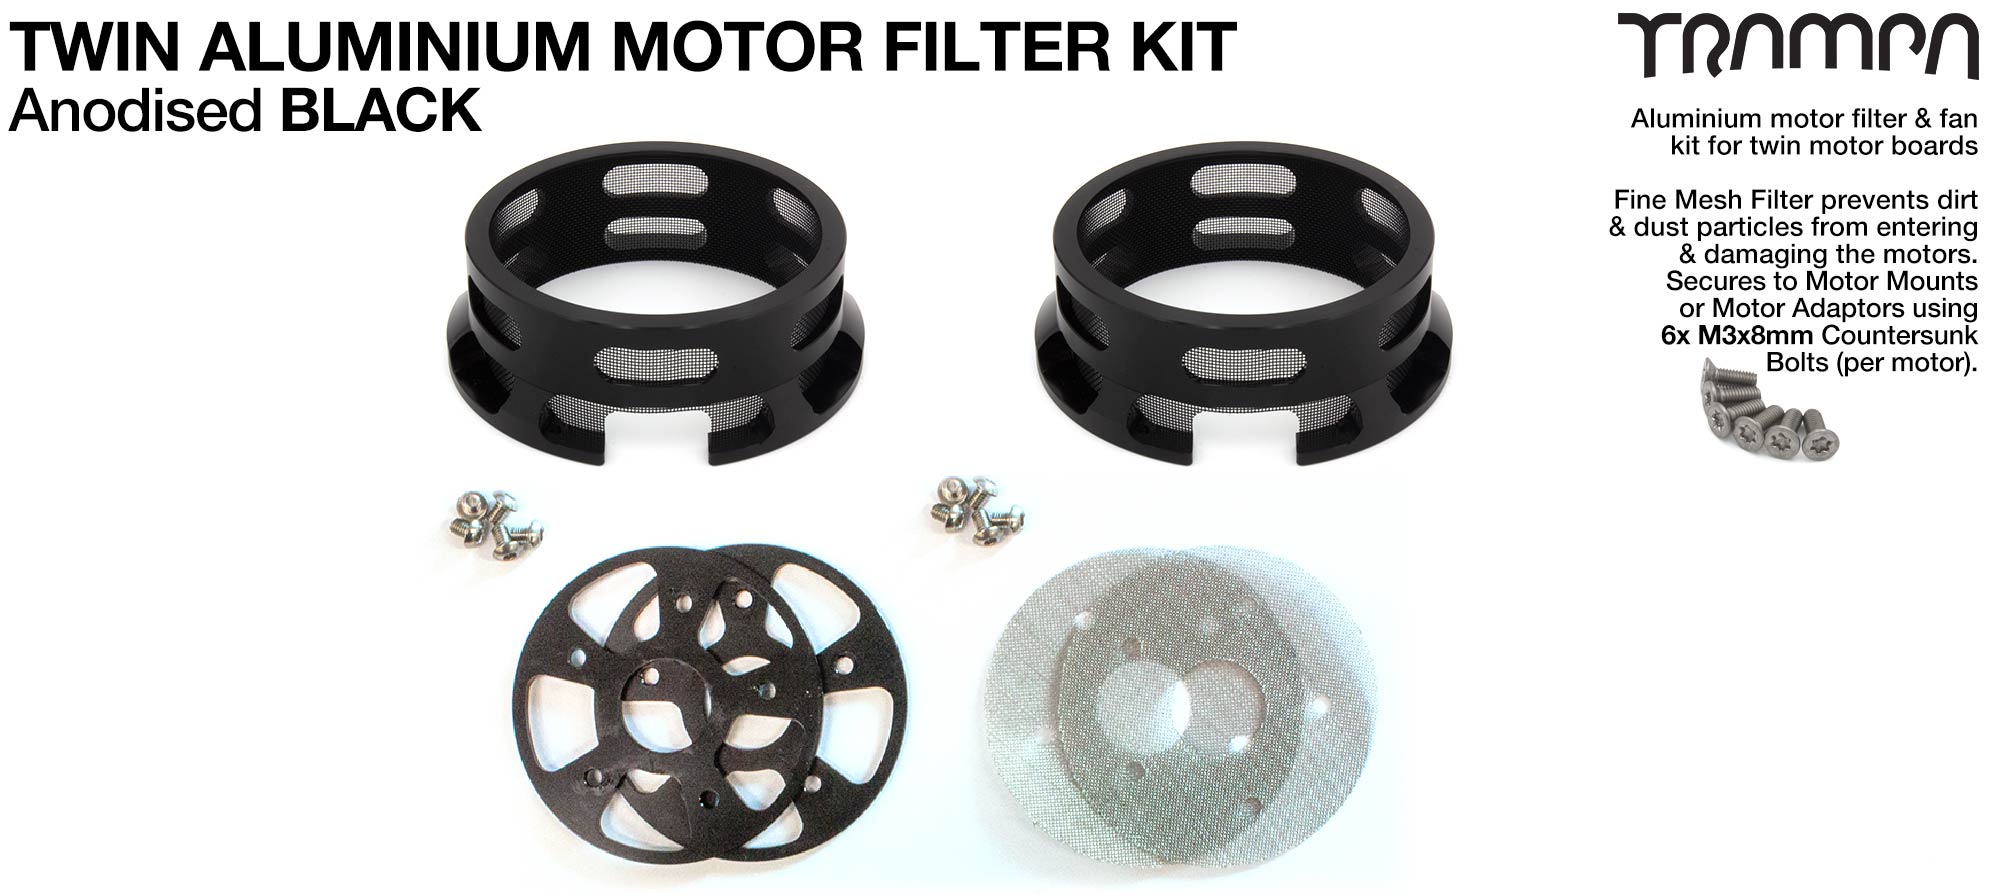 HALF CAGE Motor protection  - BLACK anodised with Filters - TWIN